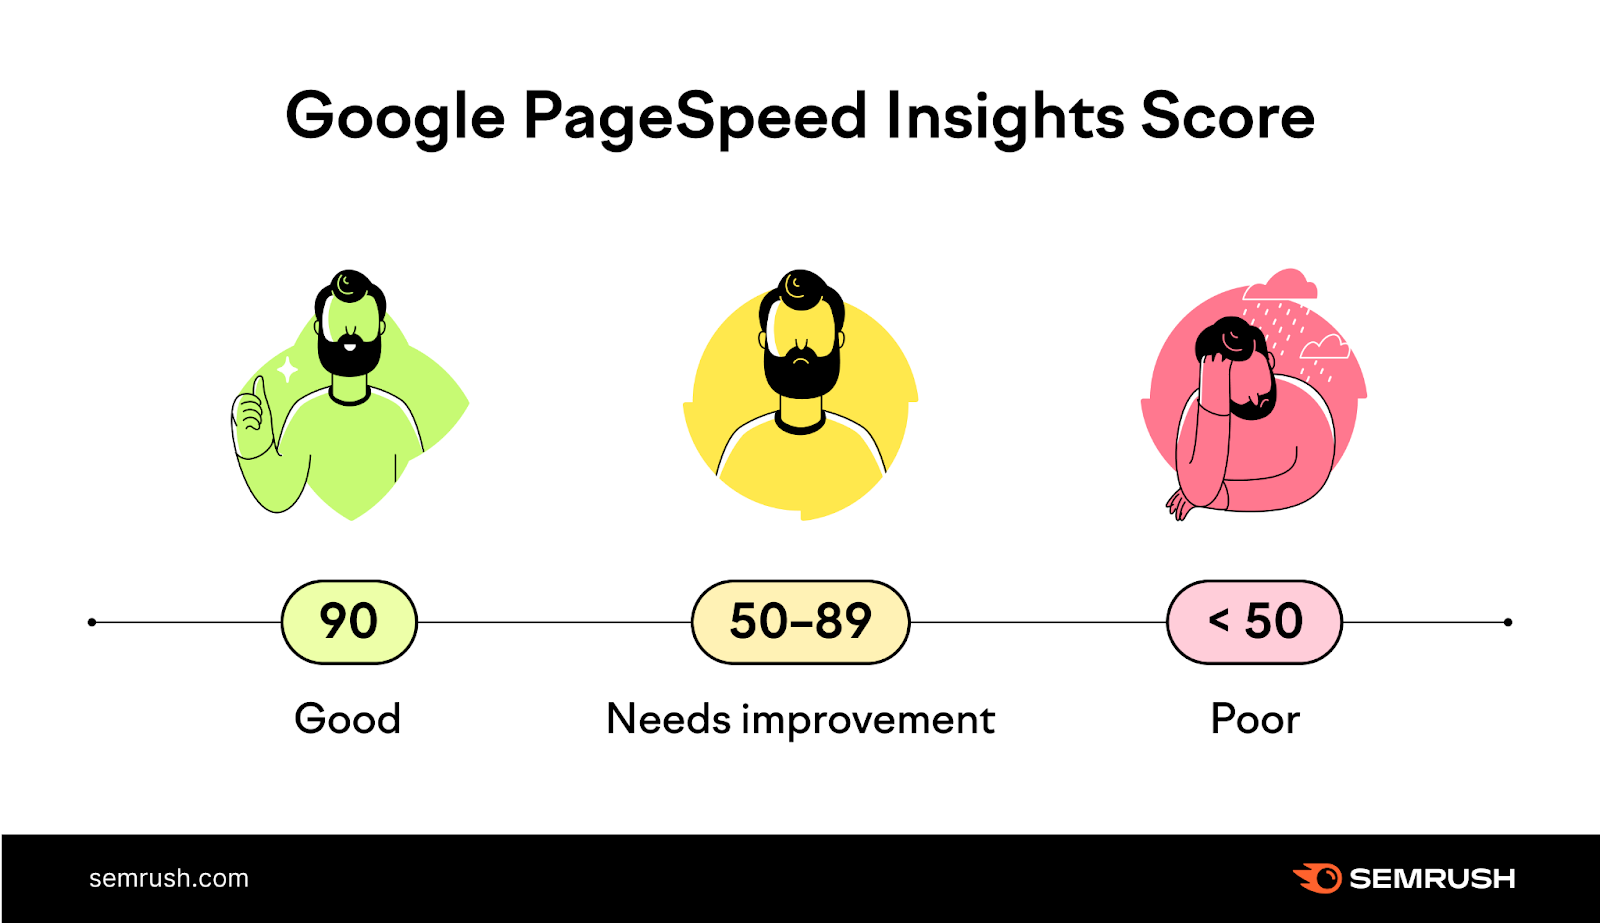 an infographic s،wing Google PageS،d insights scores for "good" "needs improvement" and "poor"